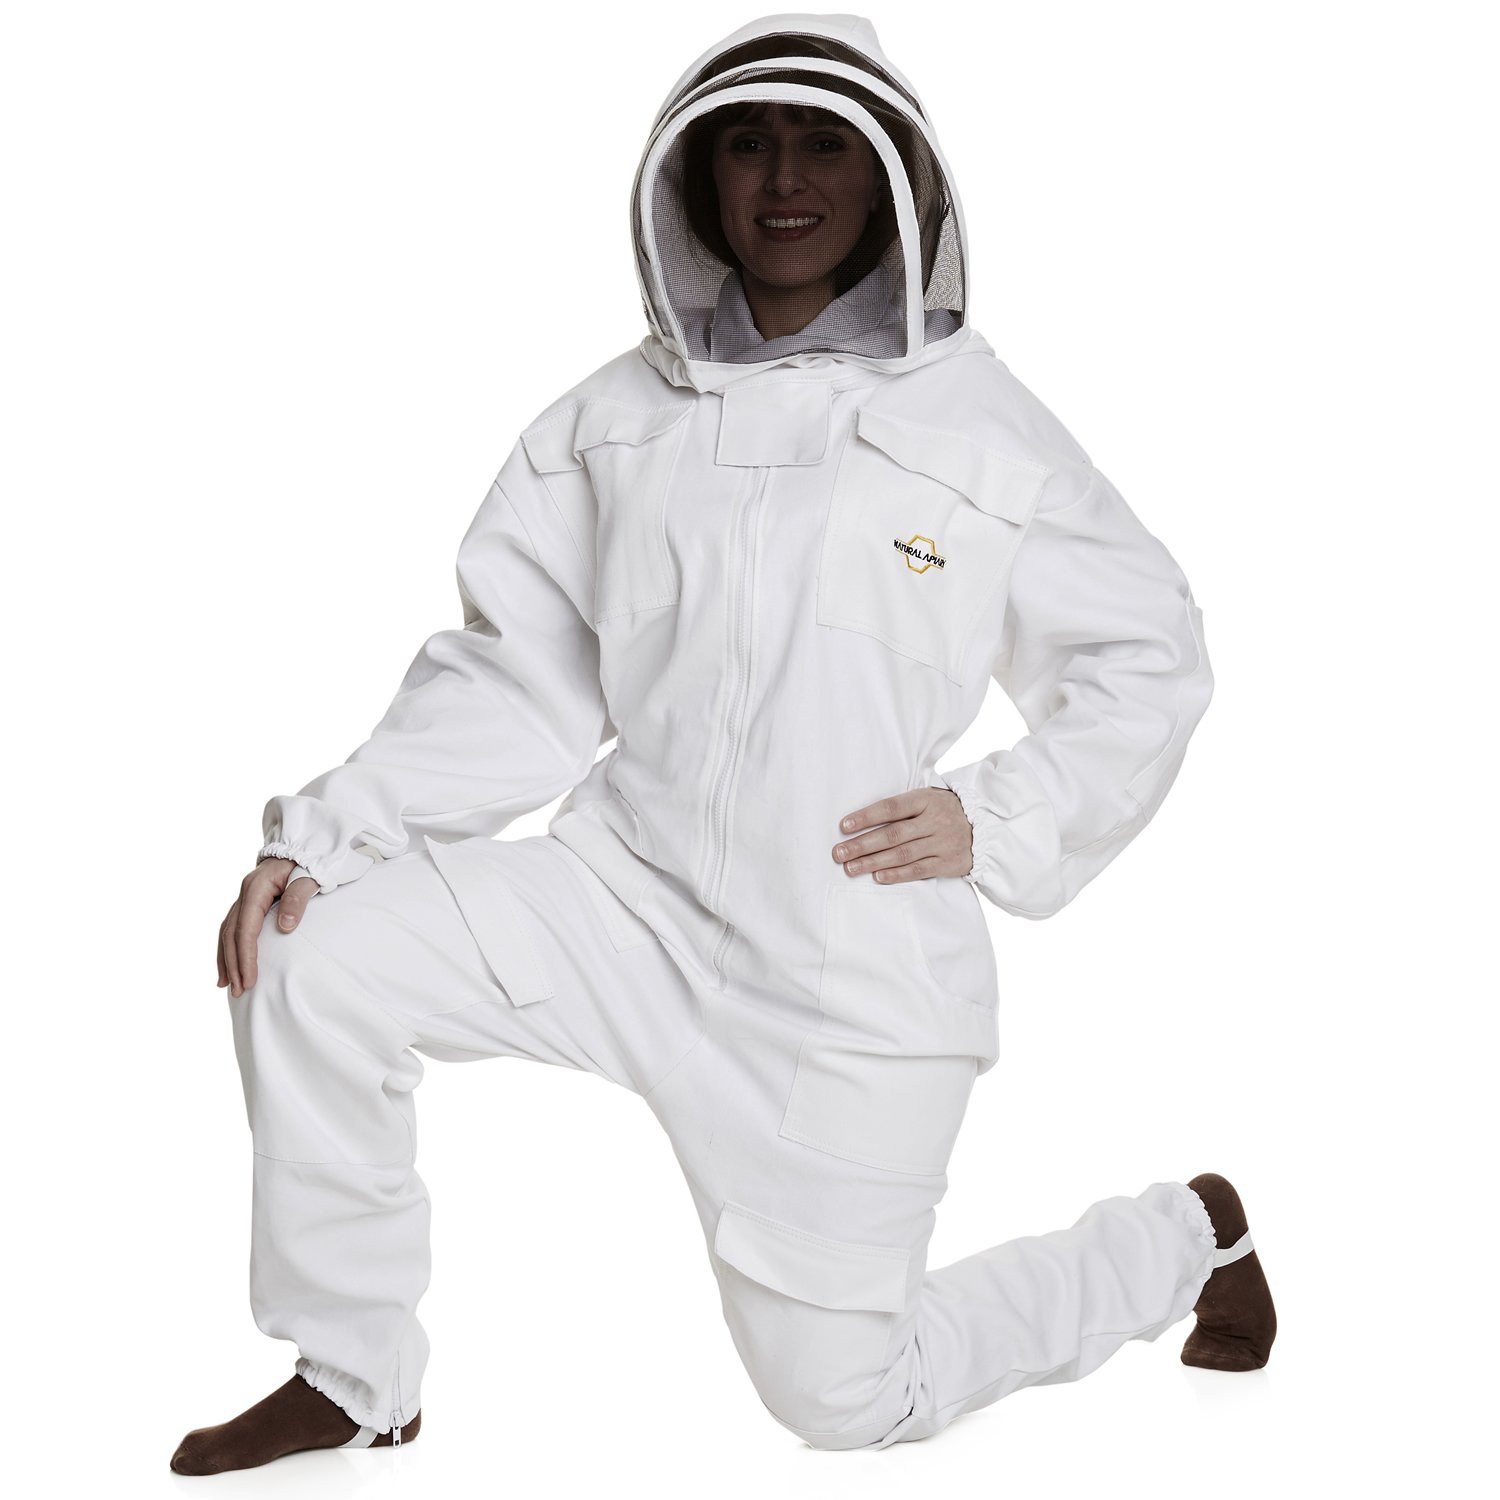 10 Best Beekeeping Suits For Every Beekeeper Reviews Buying Guide,Strollers That Face You